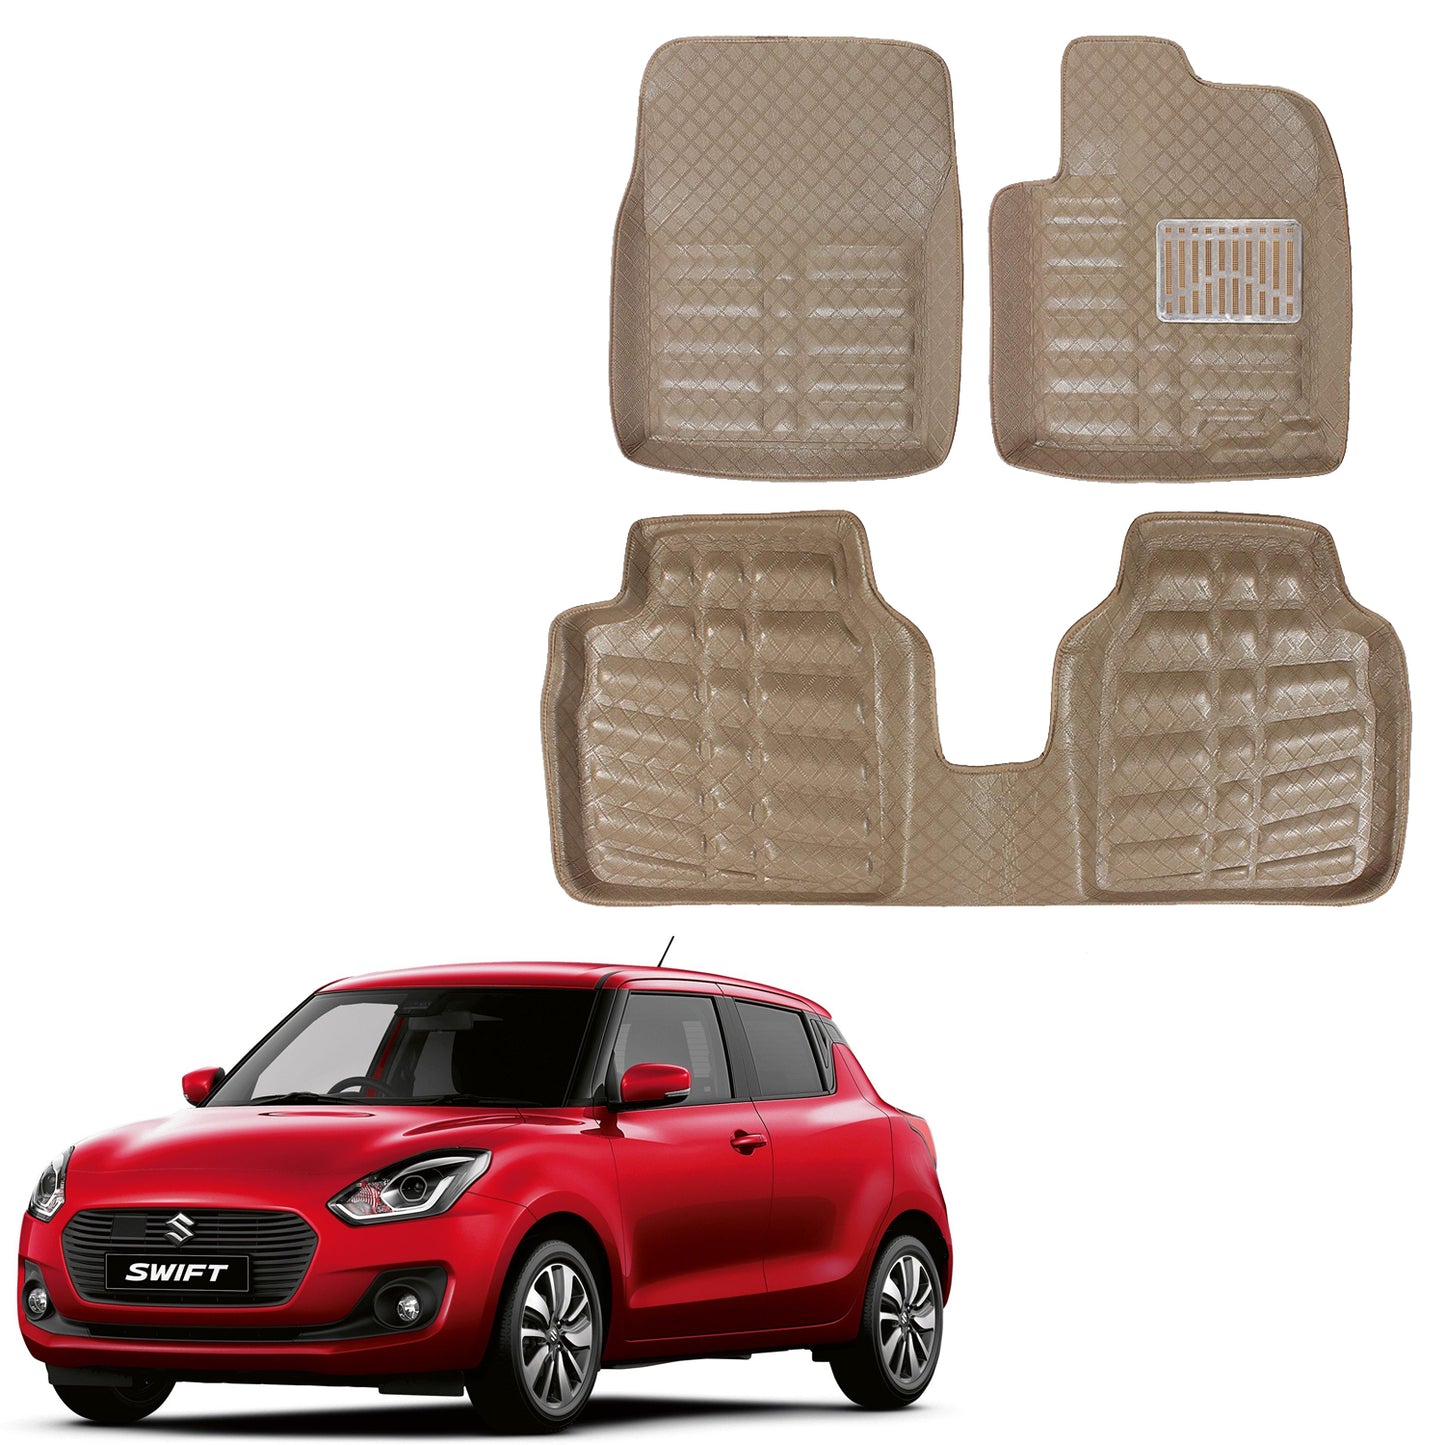 Oshotto 4D Artificial Leather Car Floor Mats For Maruti Suzuki Swift (2005-2017) - Set of 3 (2 pcs Front & one Long Single Rear pc) - Beige